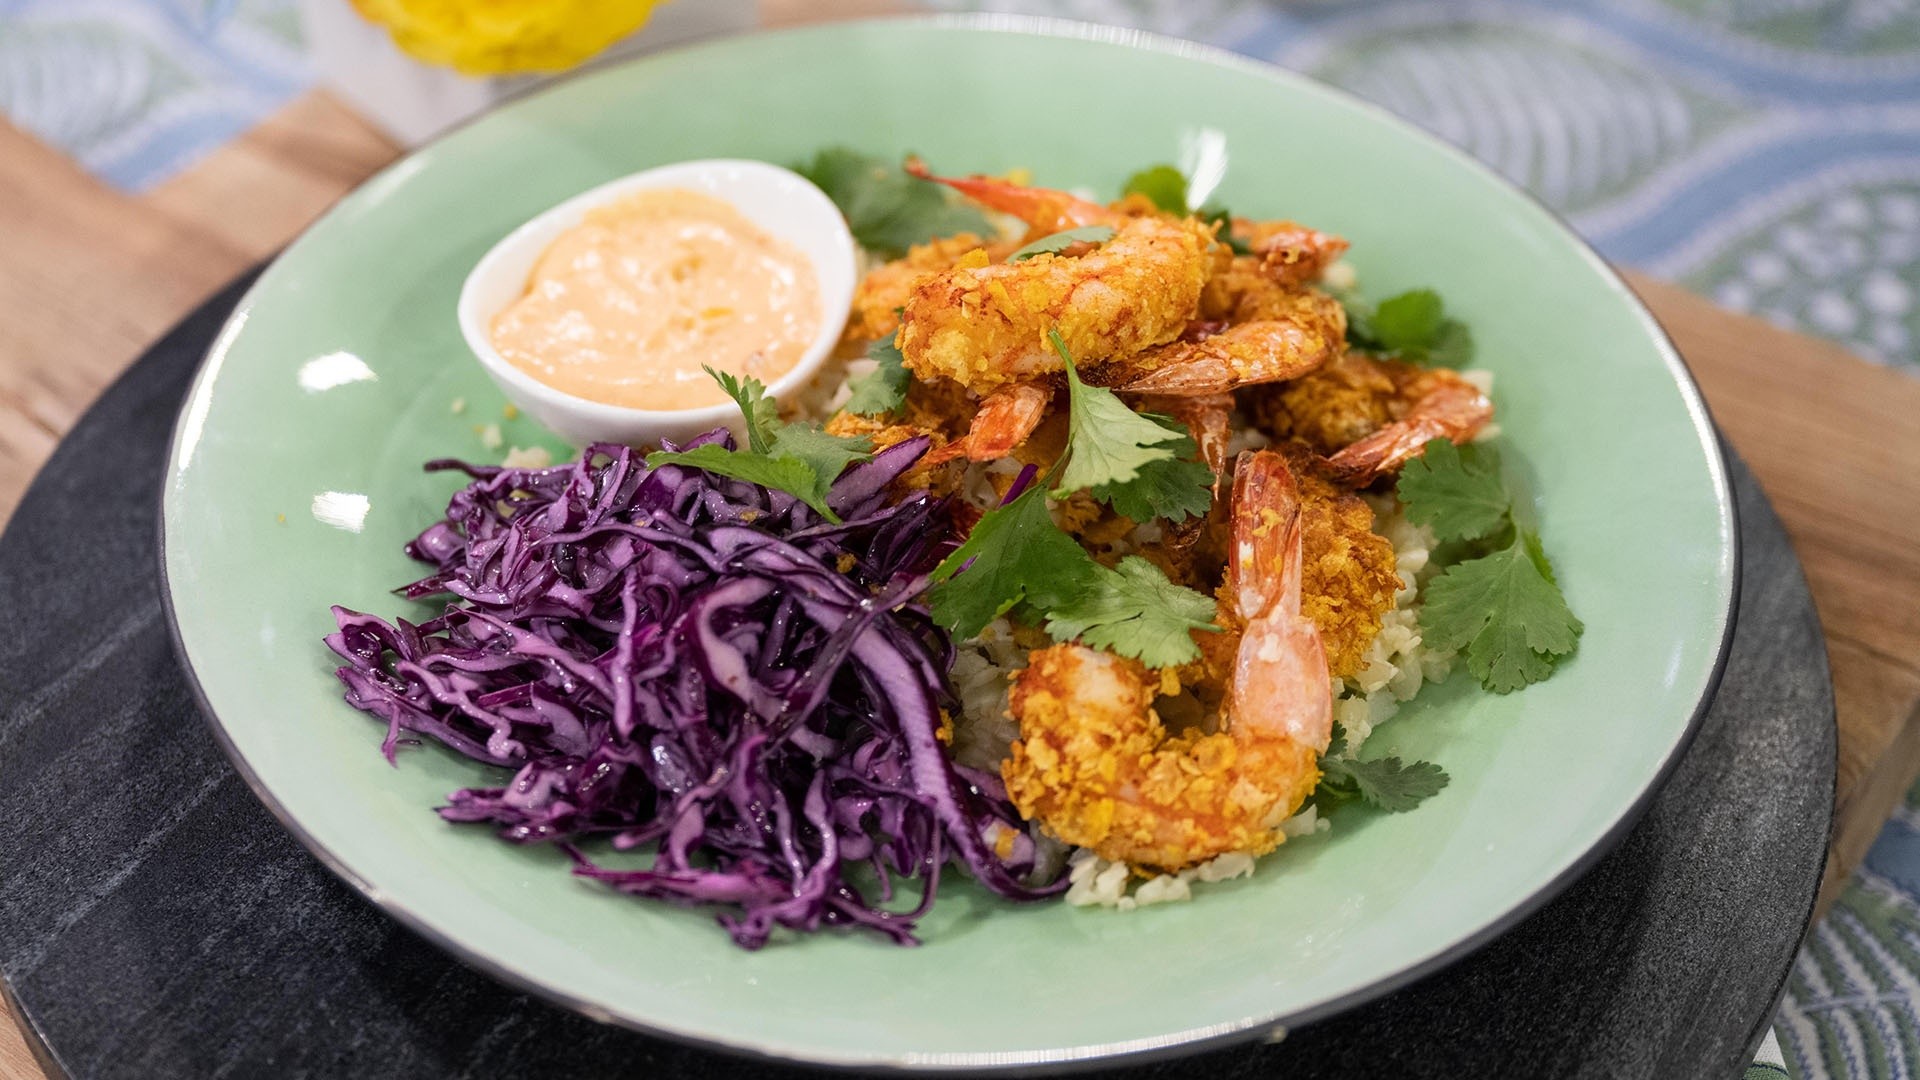 https://media-cldnry.s-nbcnews.com/image/upload/mpx/2704722219/2023_04/1681219671029_tdy_food_8a_table_airfryer_shrimp_230411_1920x1080-v96cu4.jpg